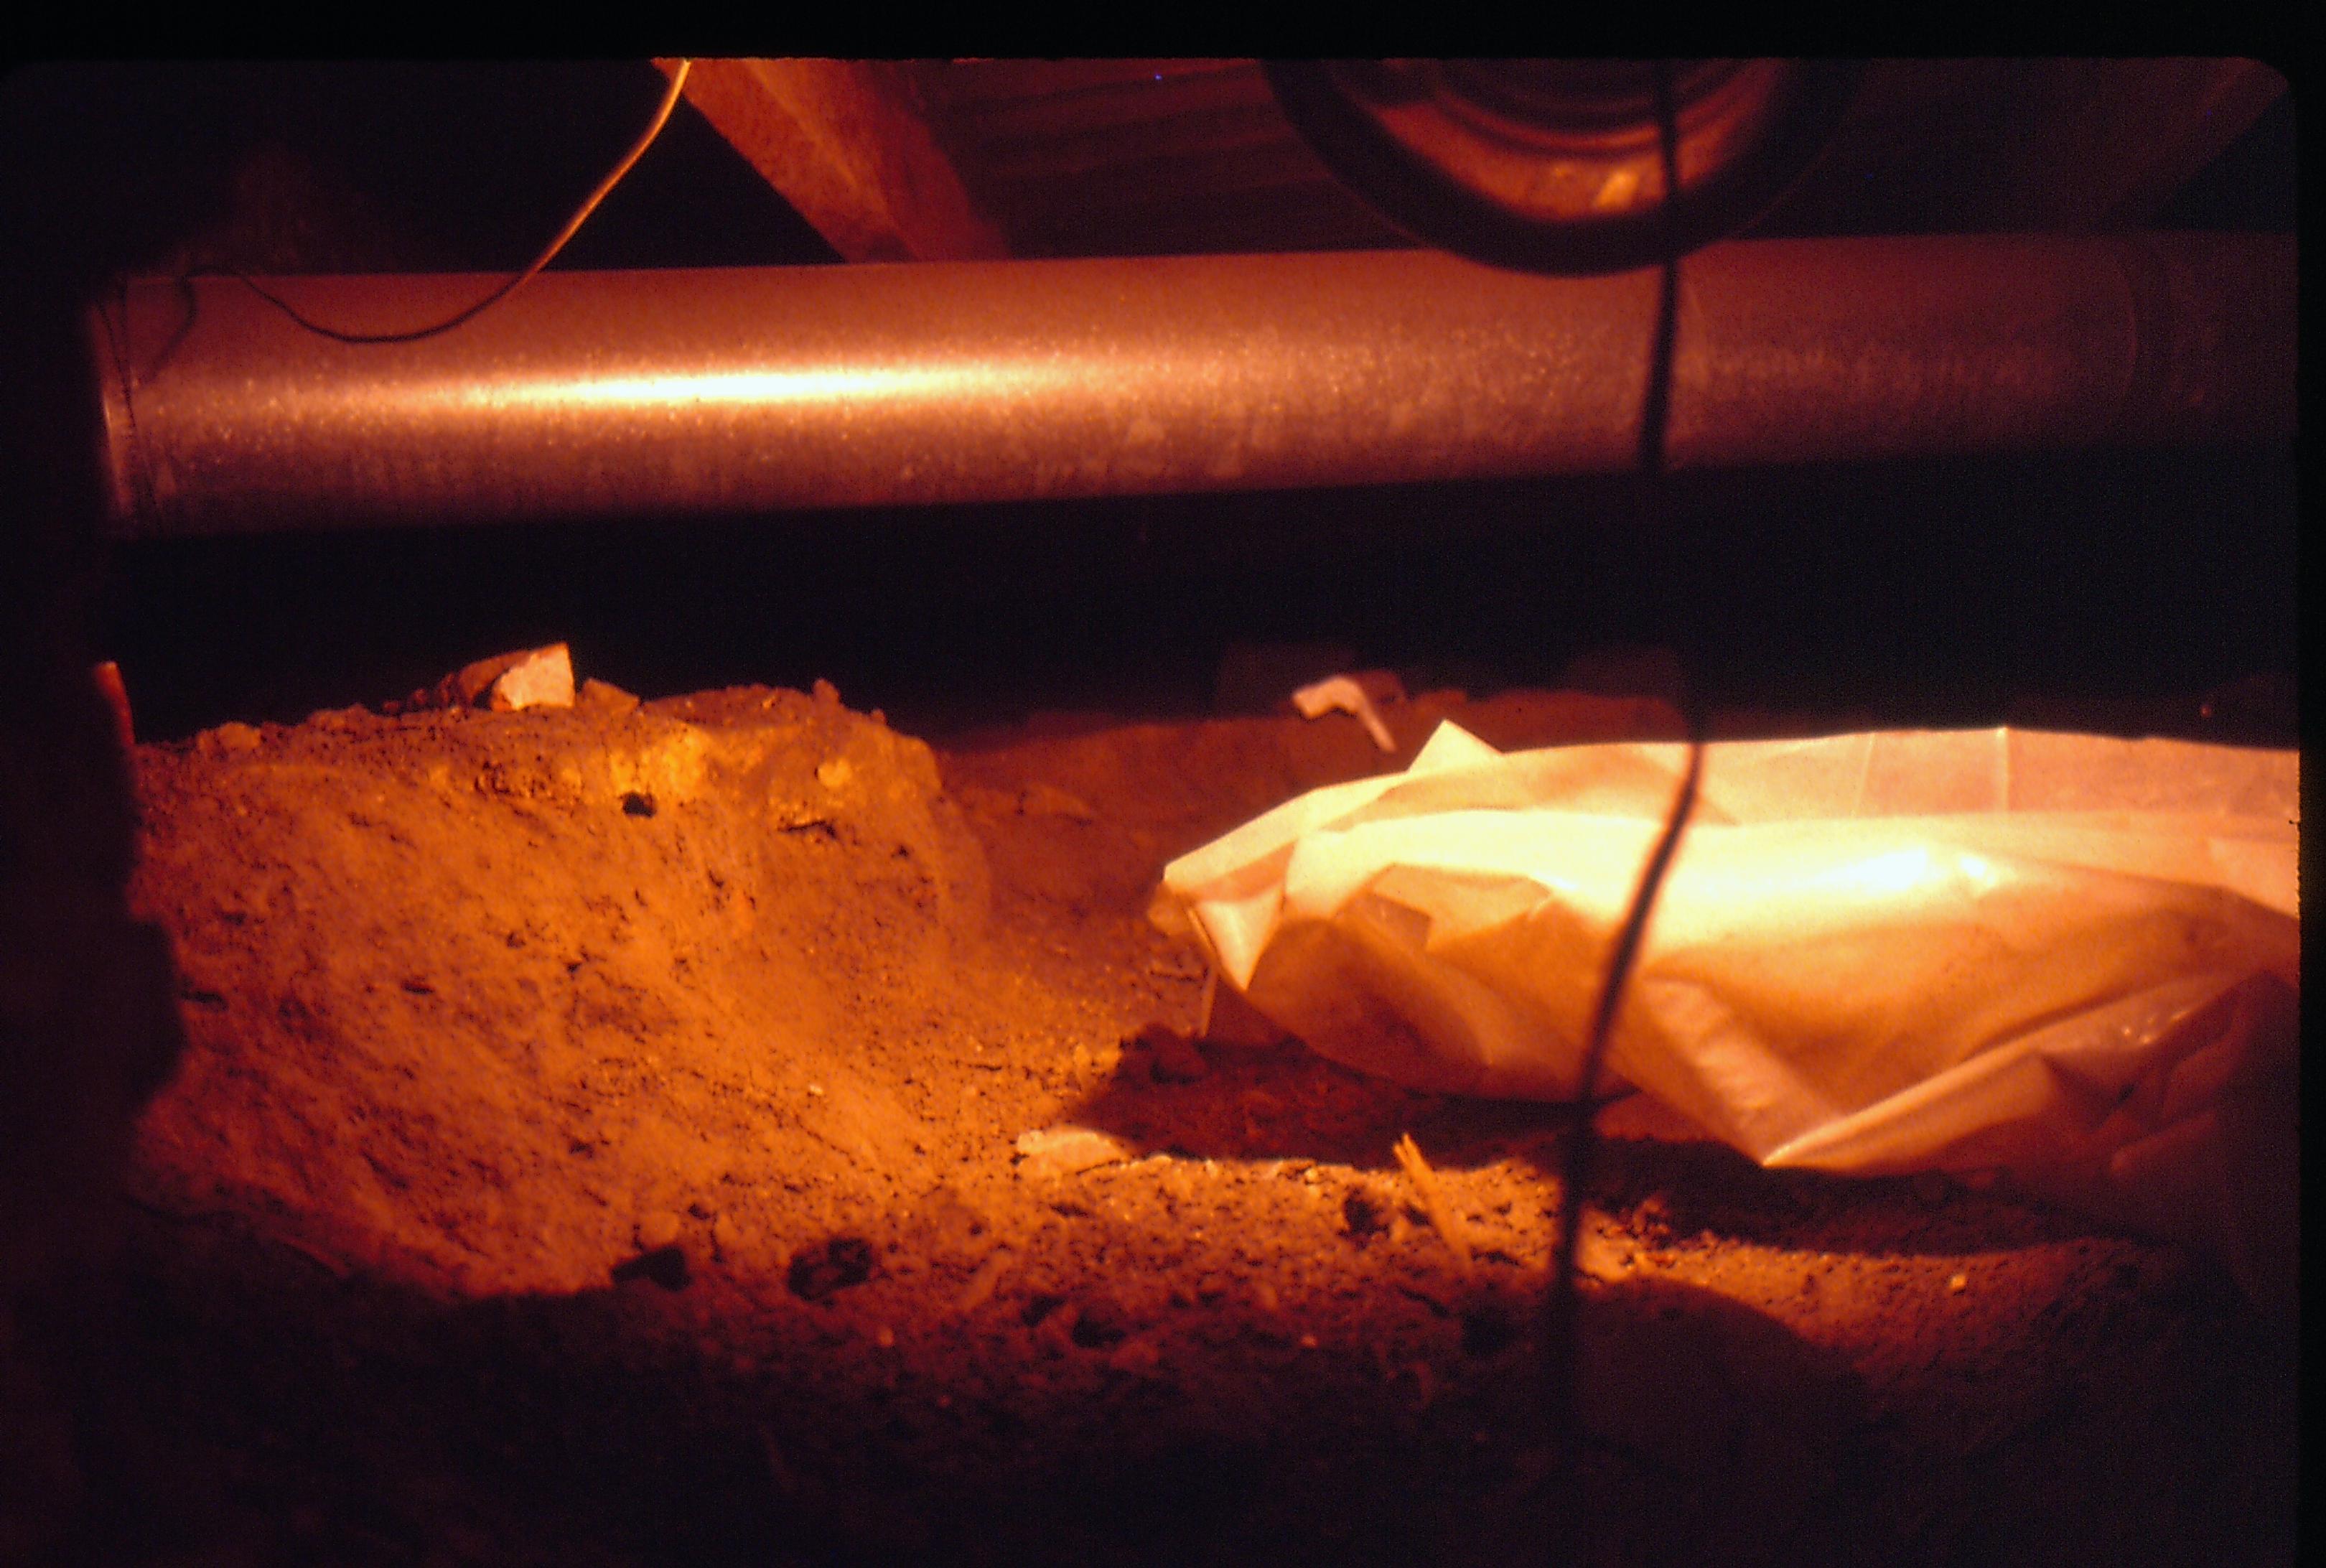 Lyon House - Crawlspace showing opening from rest of basement into crawlspace. Pipes visible near ceiling, wire for safety light hanging down, white plastic bag? within space filled with dirt and sand. Looking East from basement Lyon, Basement, crawlspace, pipes